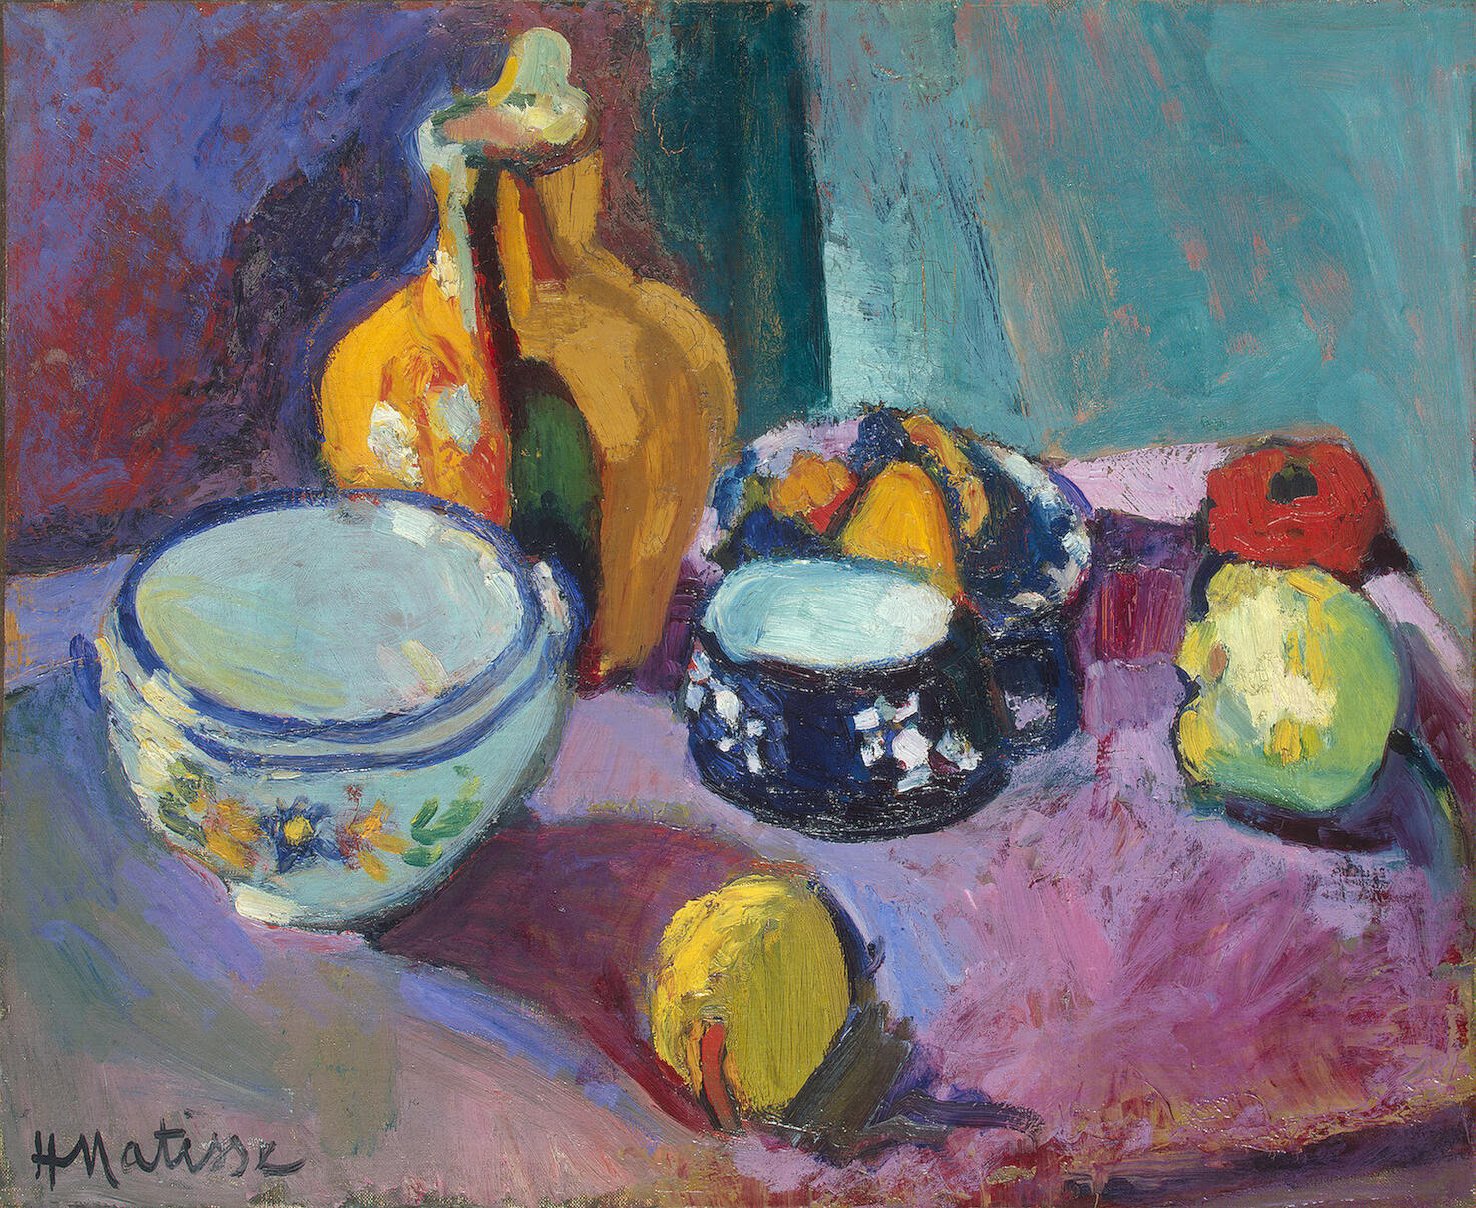 Matisse - Dishes and Fruit - 1901